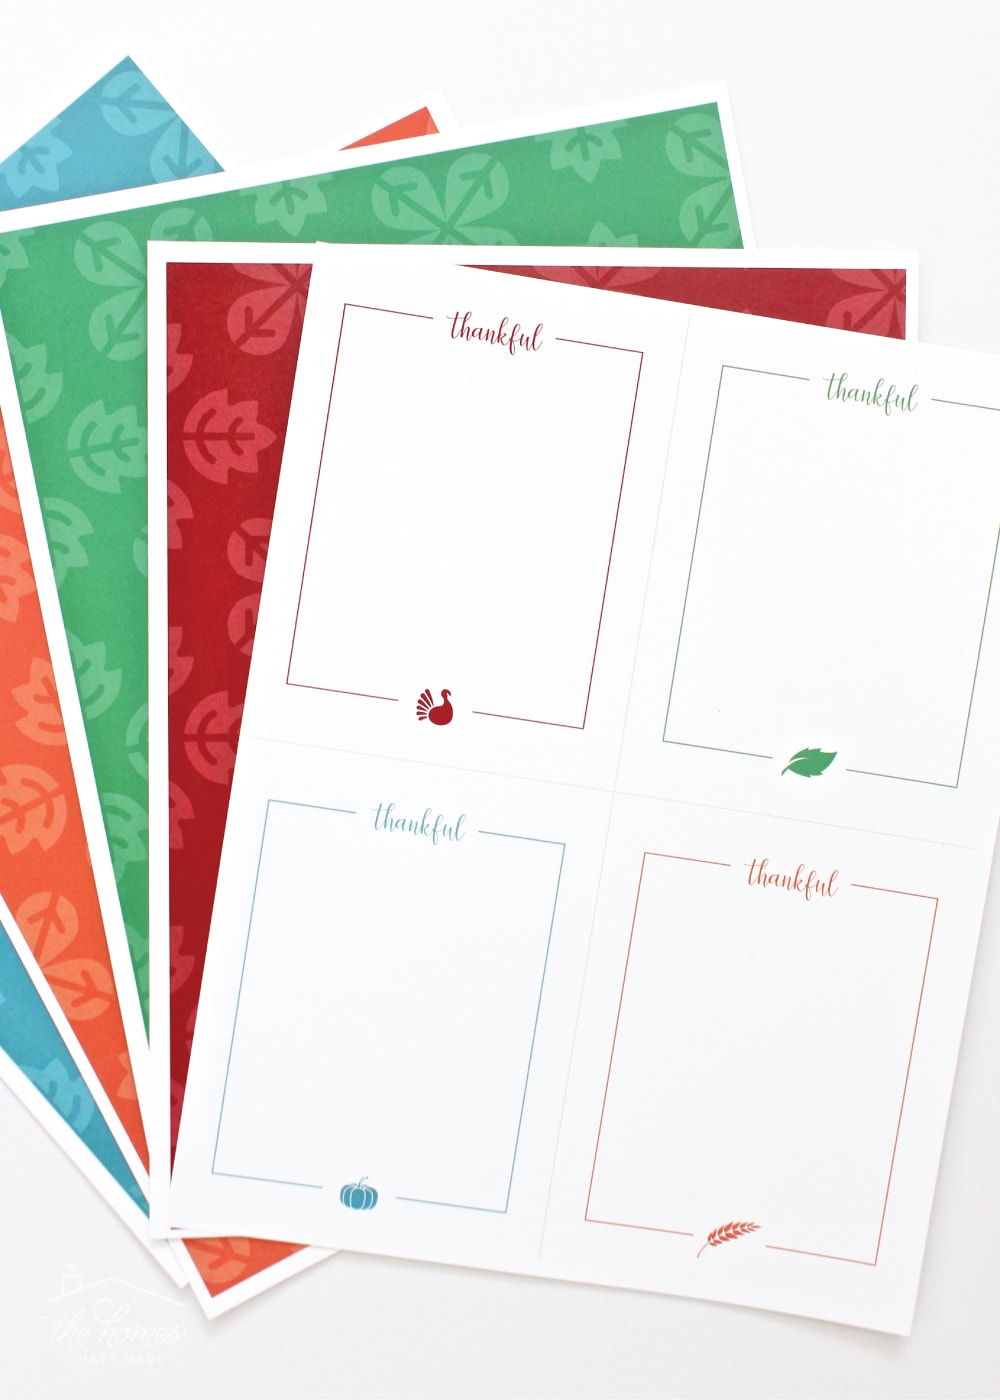 Thankful Cards, printed but not cut, with assorted scrapbook papers.